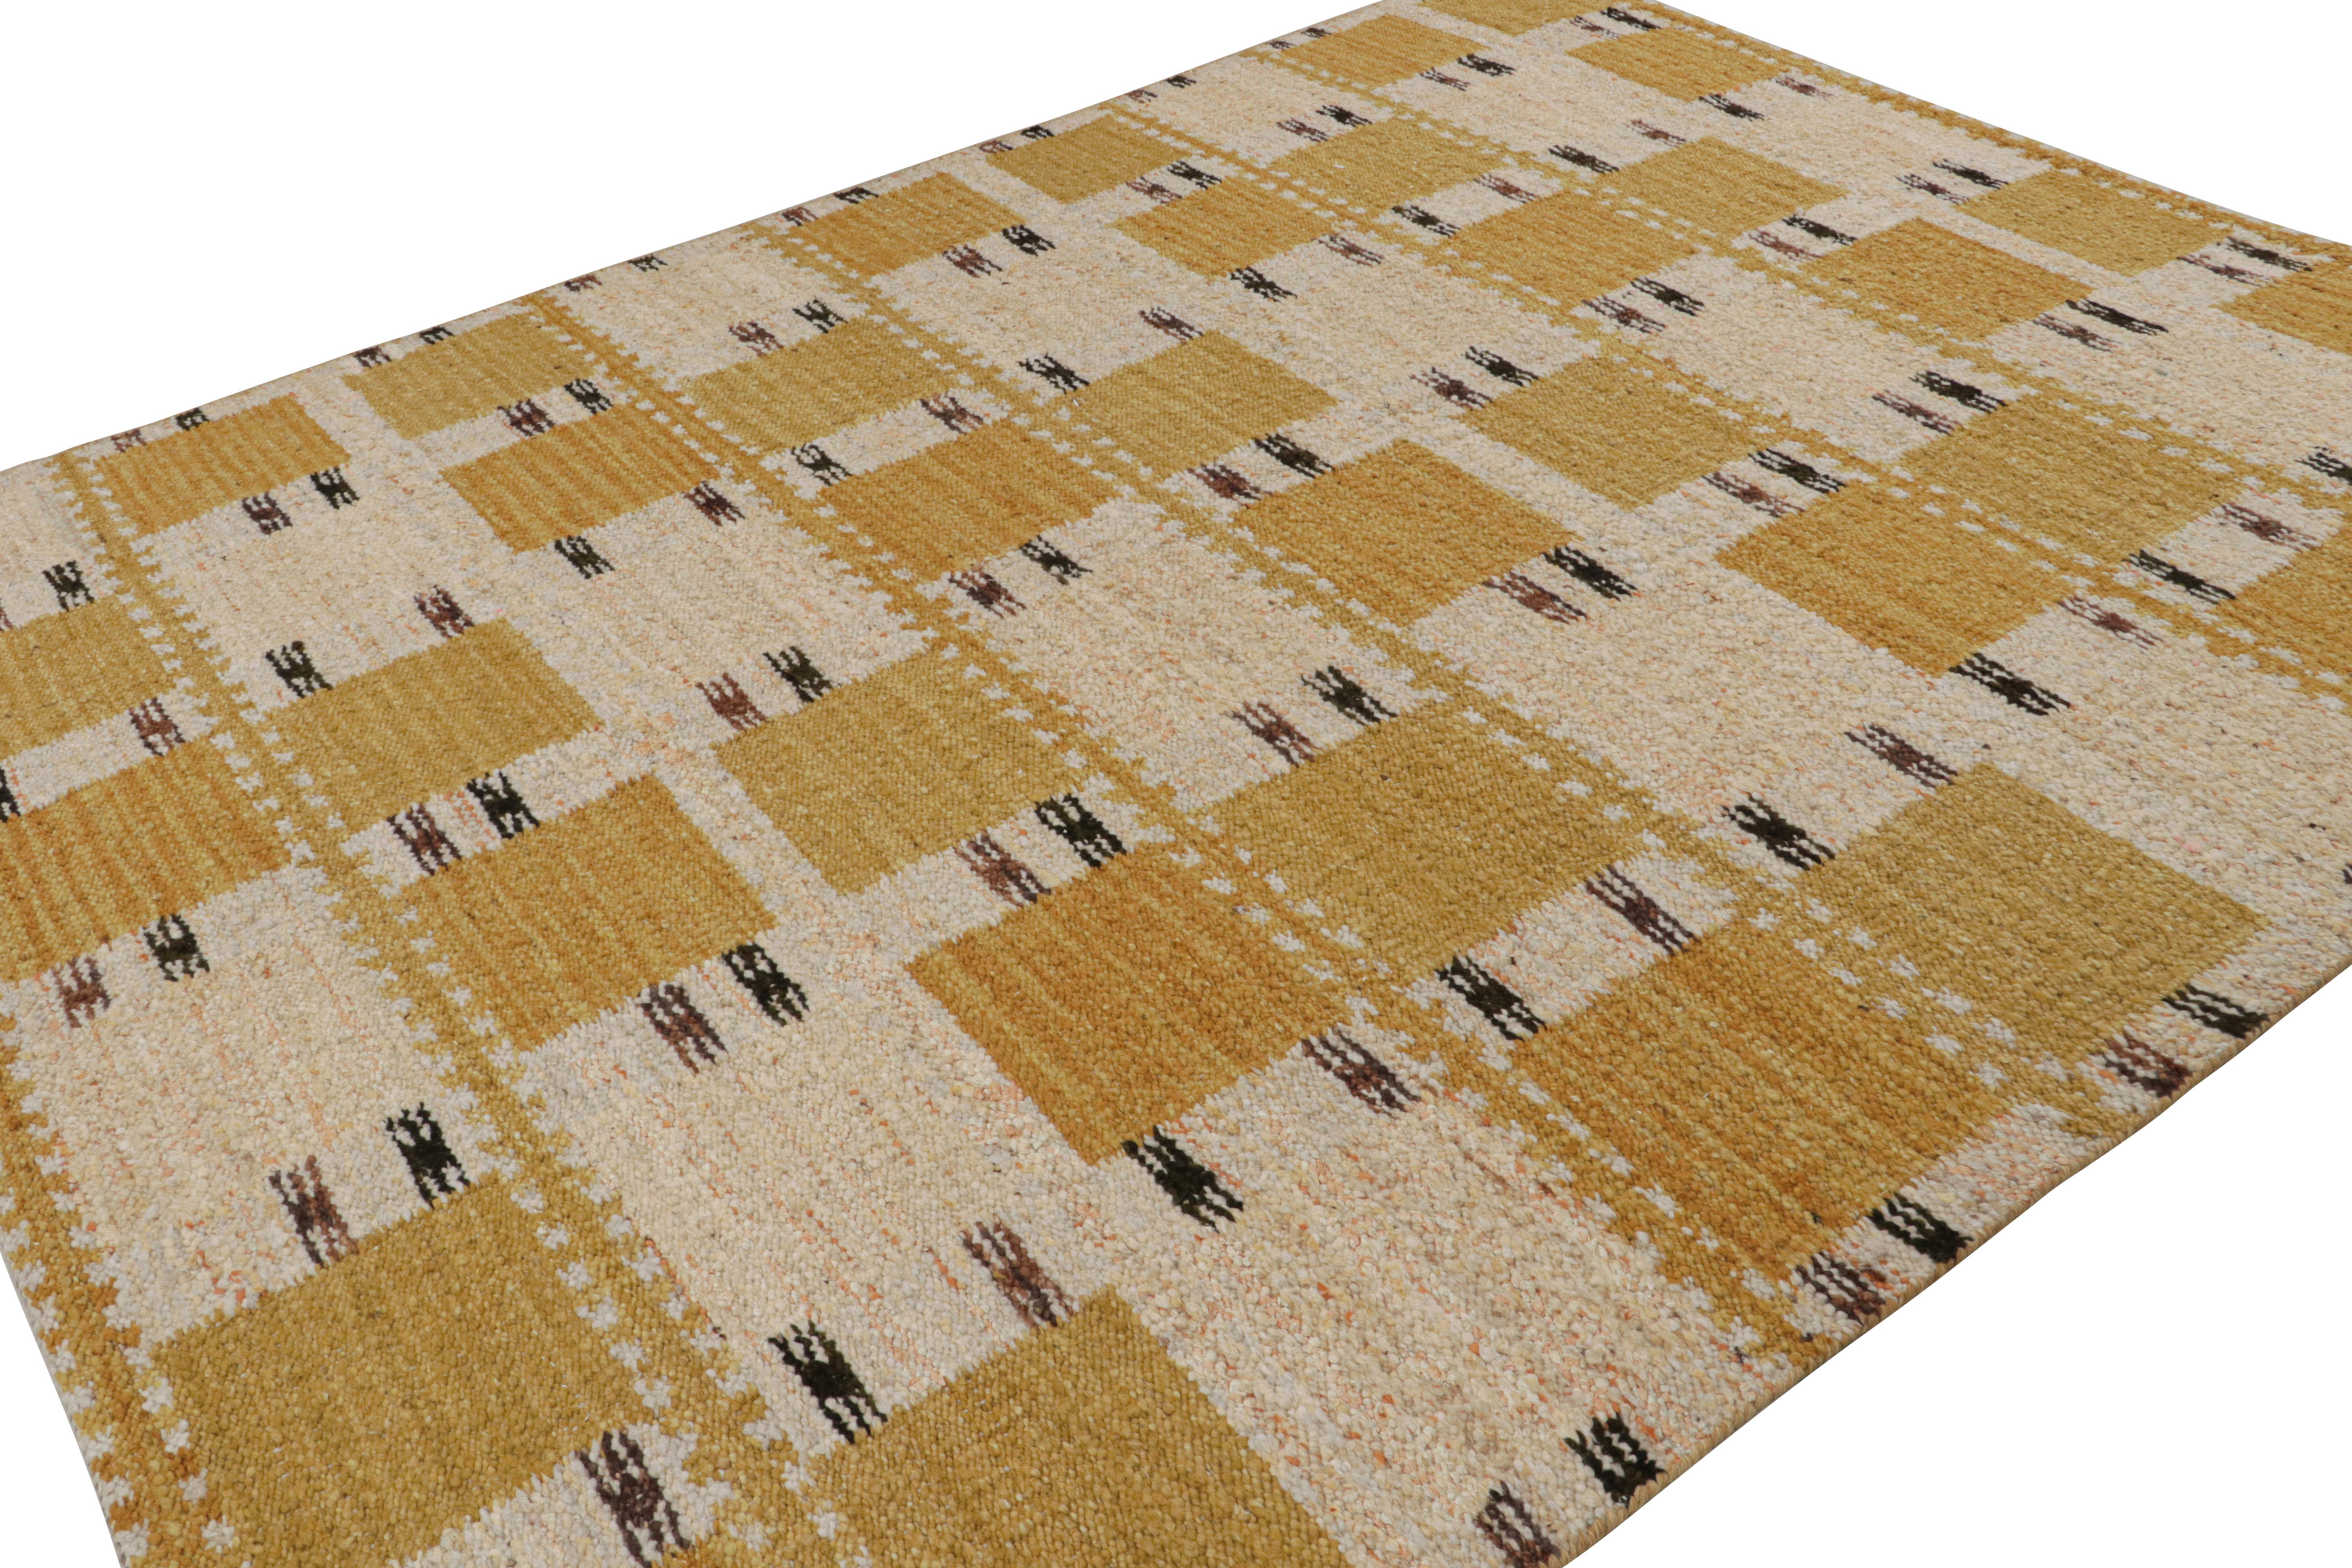 This 9x12 rug is a new Swedish style flatweaves from the Scandinavian Kilim Collection by Rug & Kilim. Handwoven in all-natural aloe, its design reflects a contemporary take on mid-century modern Swedish Deco style.  

On the Design: 

Gold tones